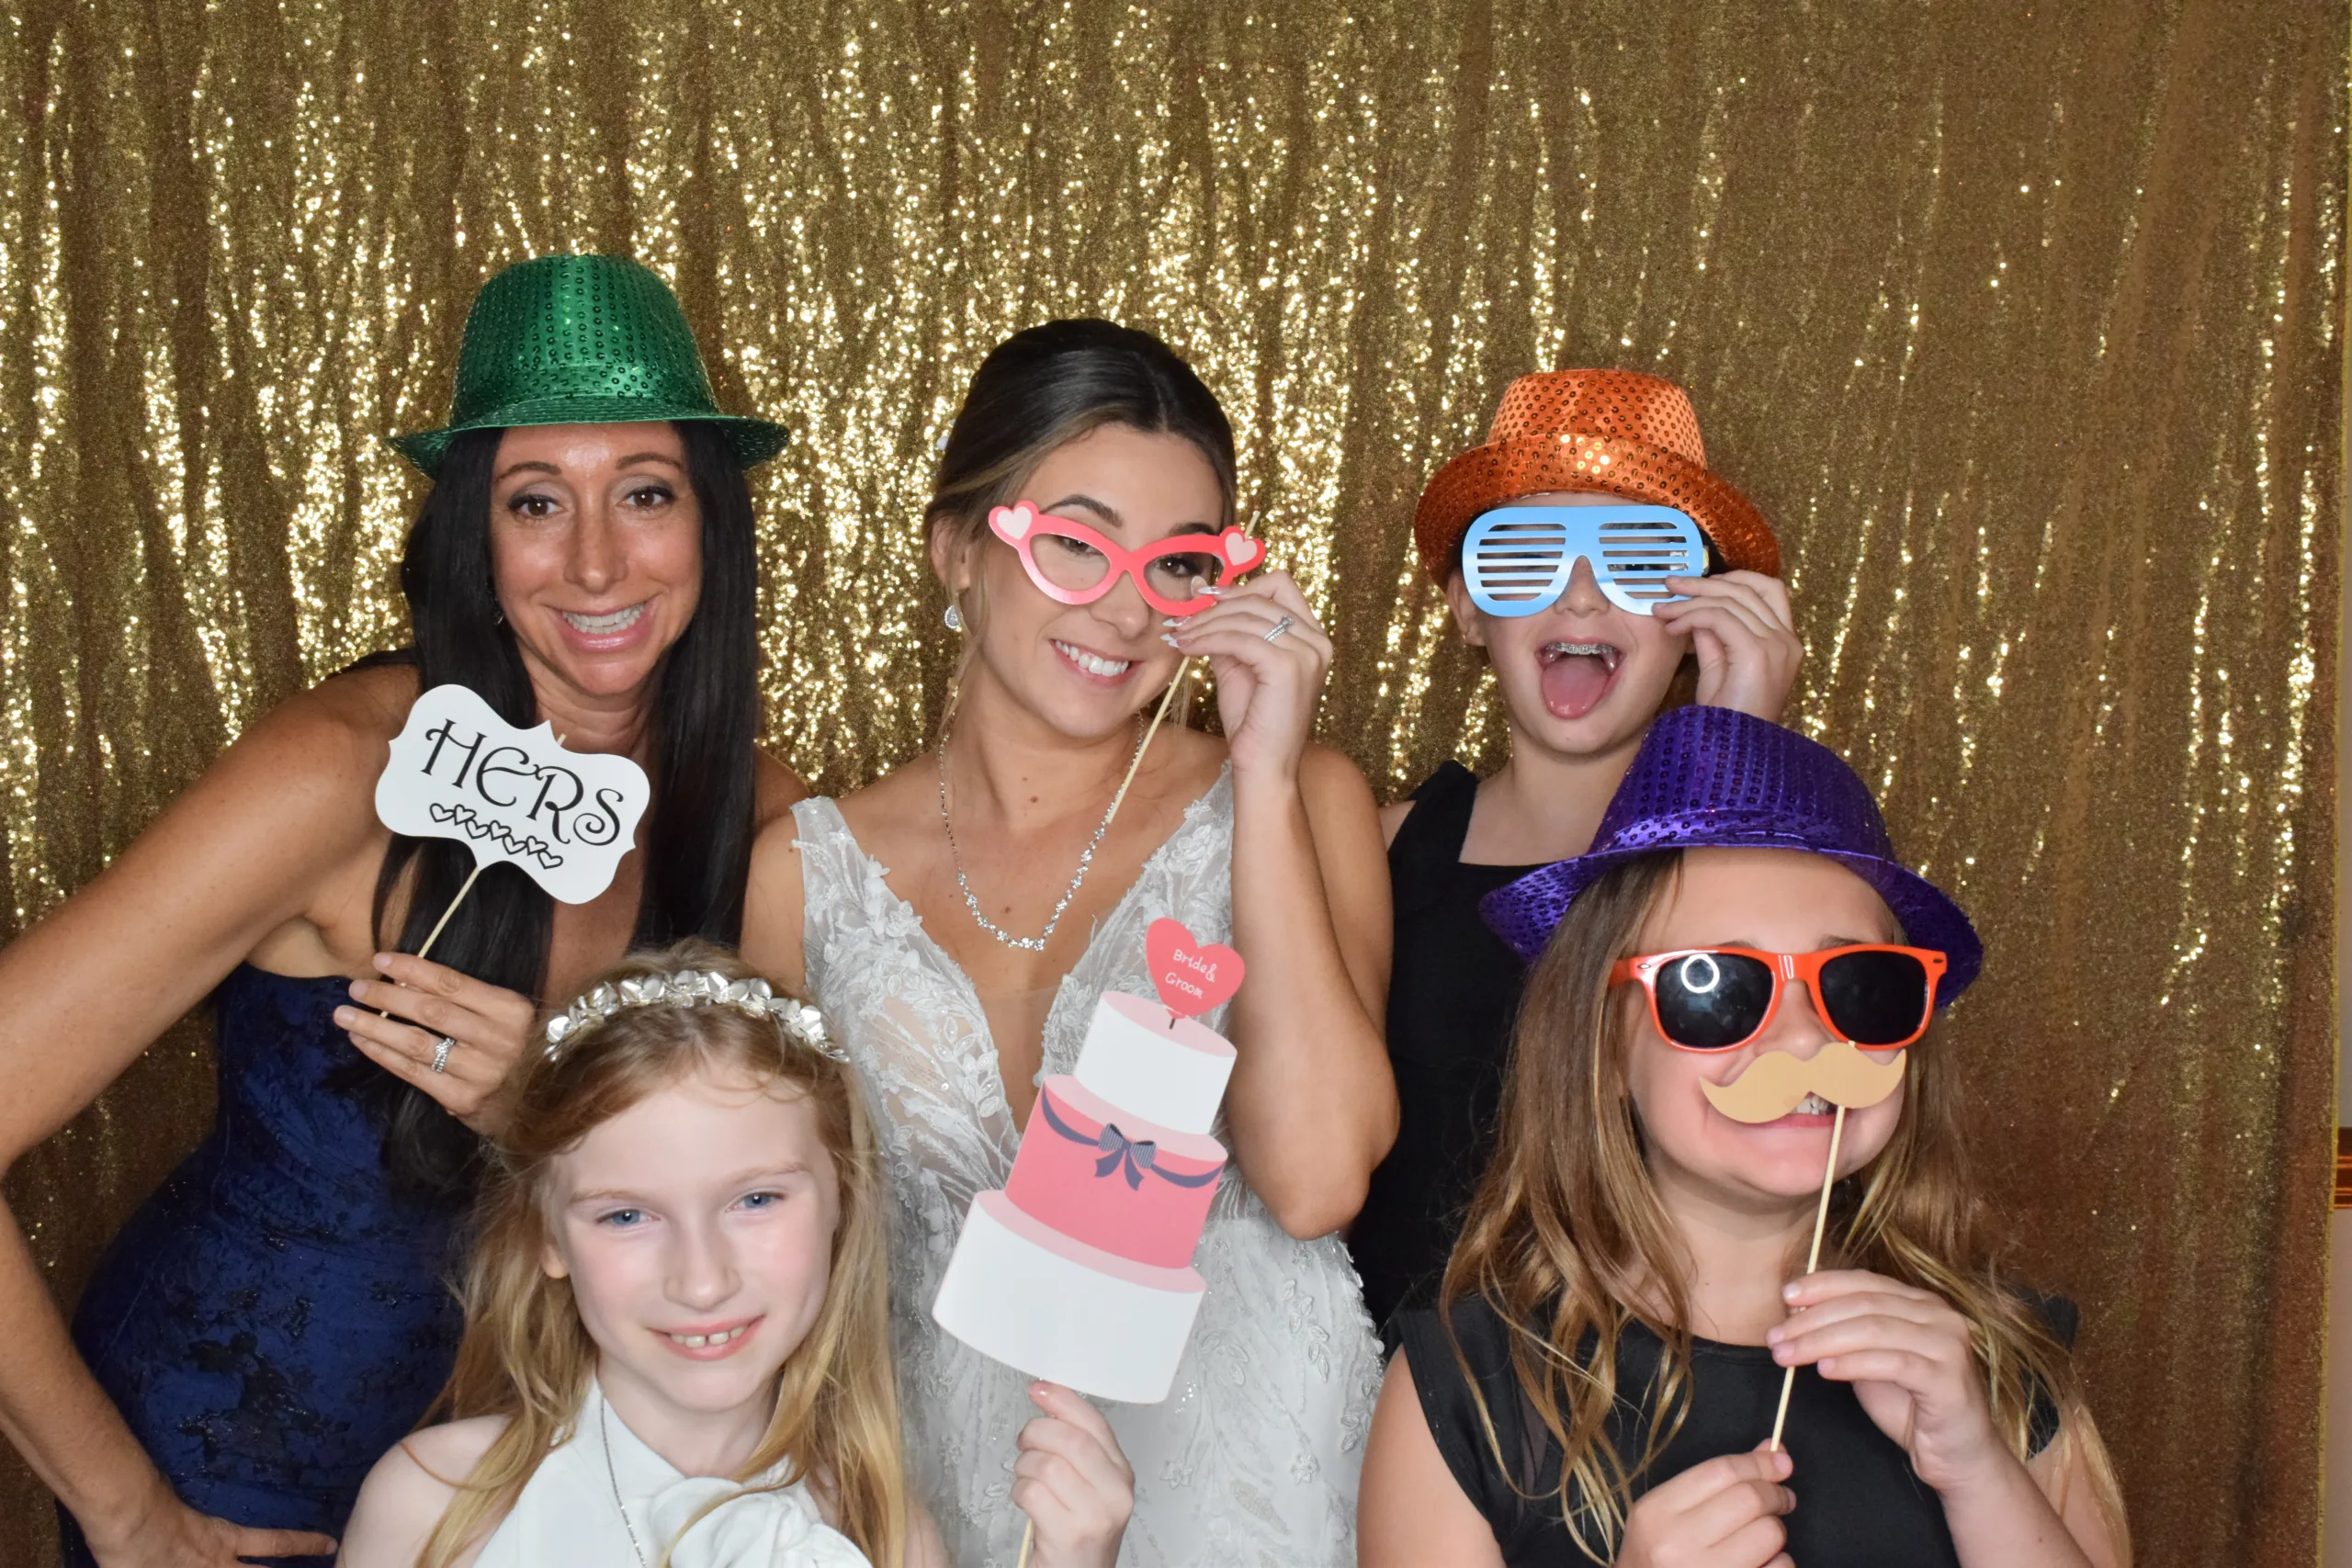 Are You Confused about Wheather to Choose a Photobooth Rental Service or Not? Learn Benefits